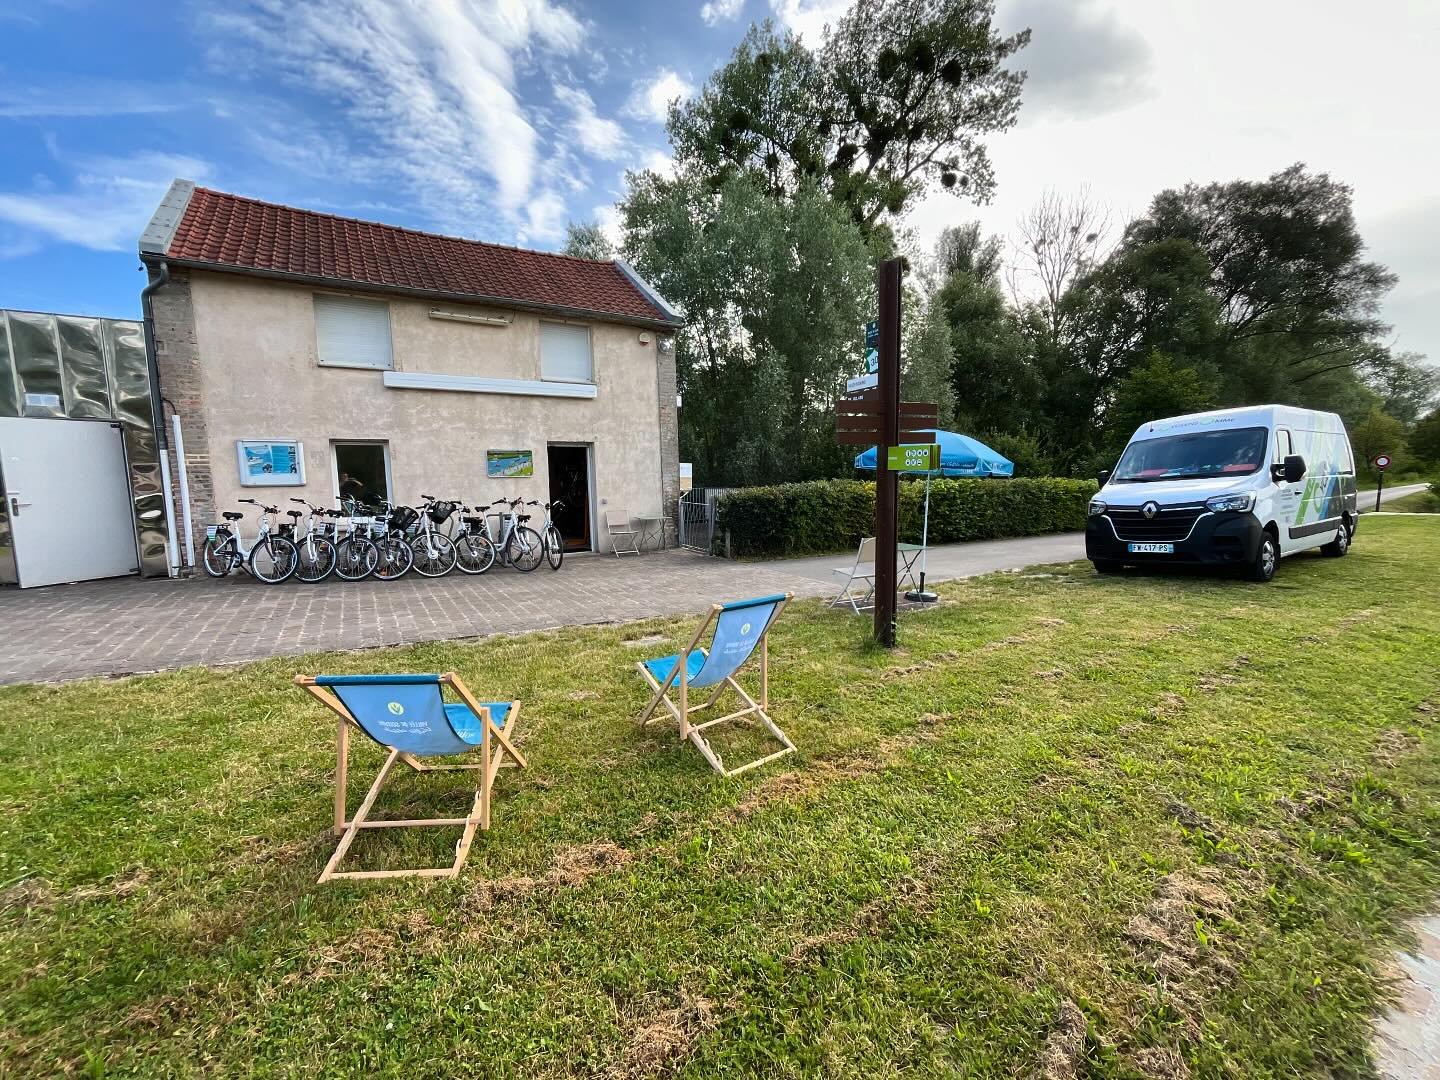 Ailly-sur-Somme_CyclenSomme_Maisonéclusiere - ©CyclenSomme